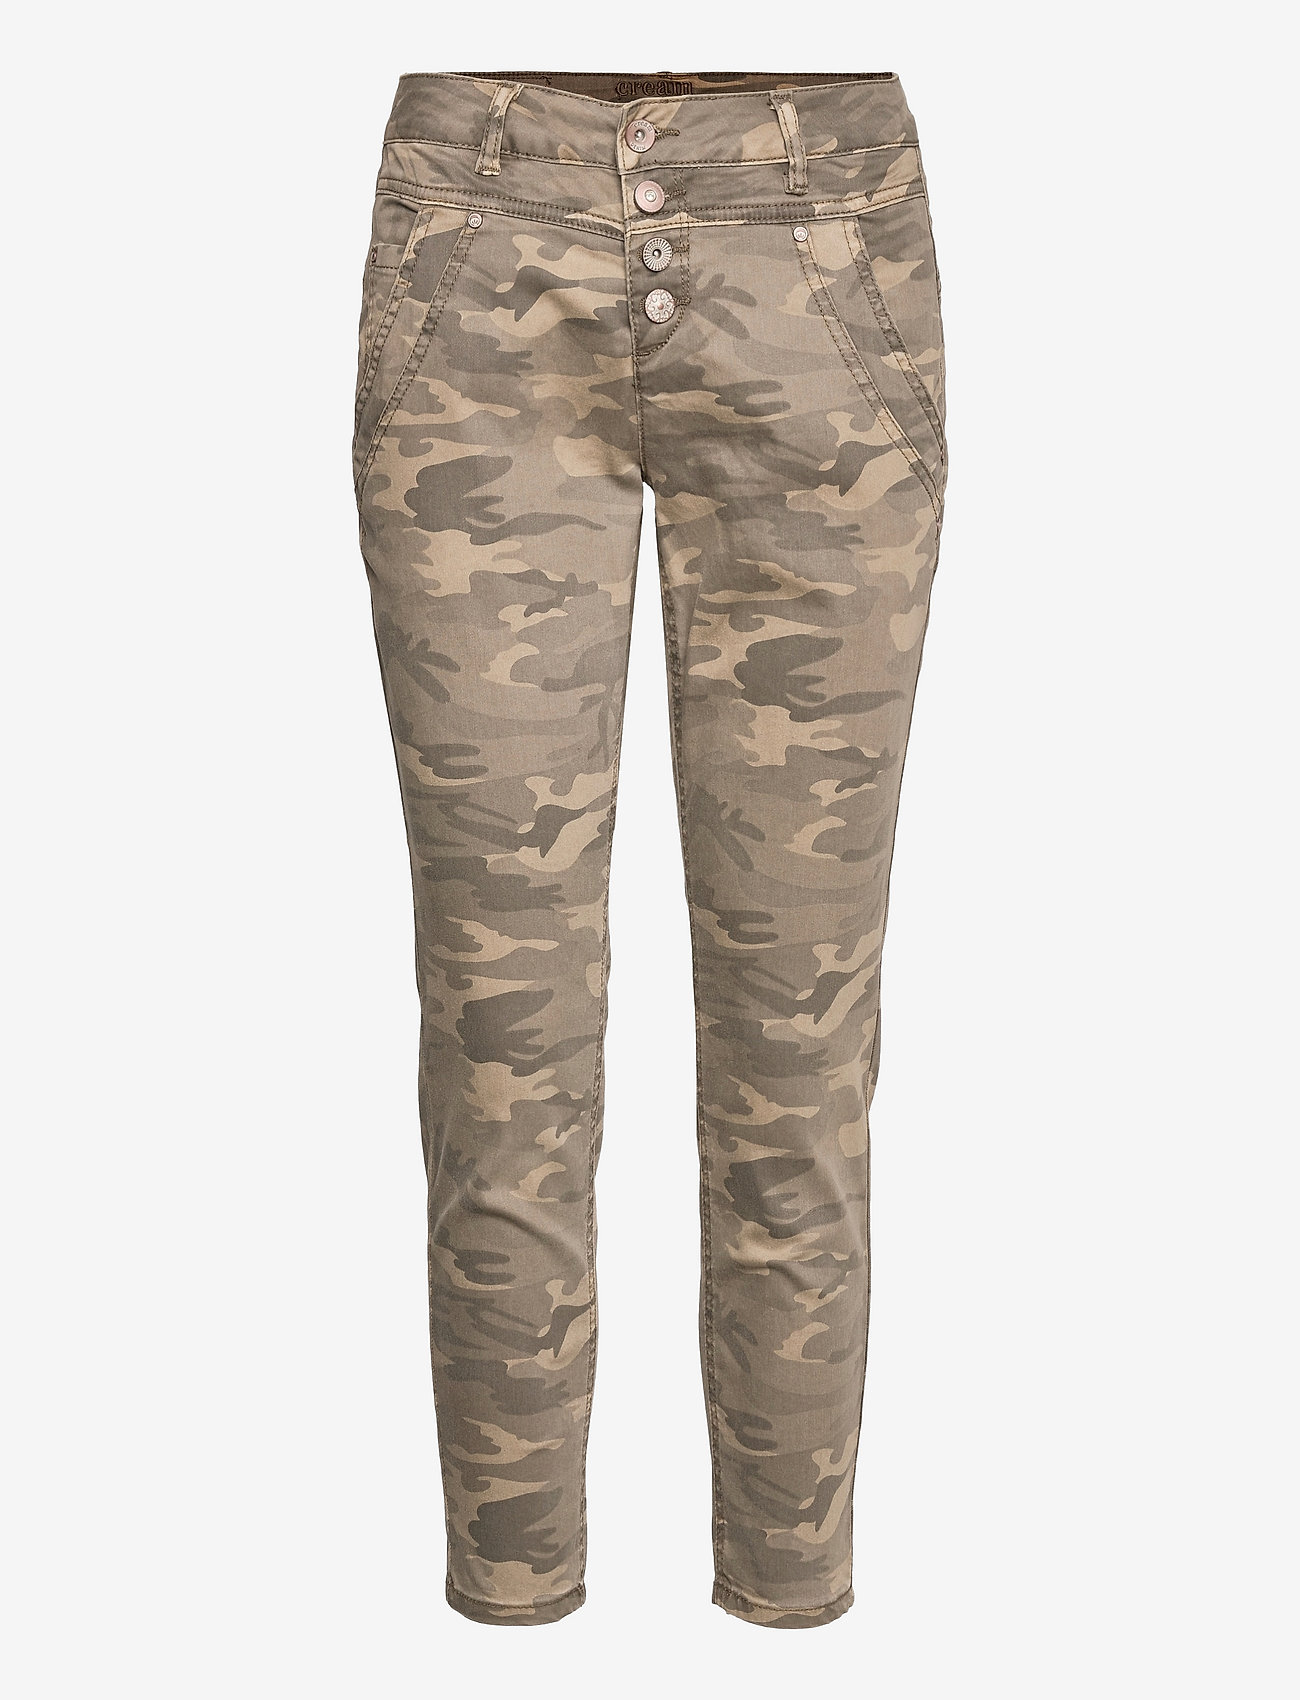 Cream - CRPenora Twill 7/8 Pant - slim fit jeans - sea green printed camouflage - 0